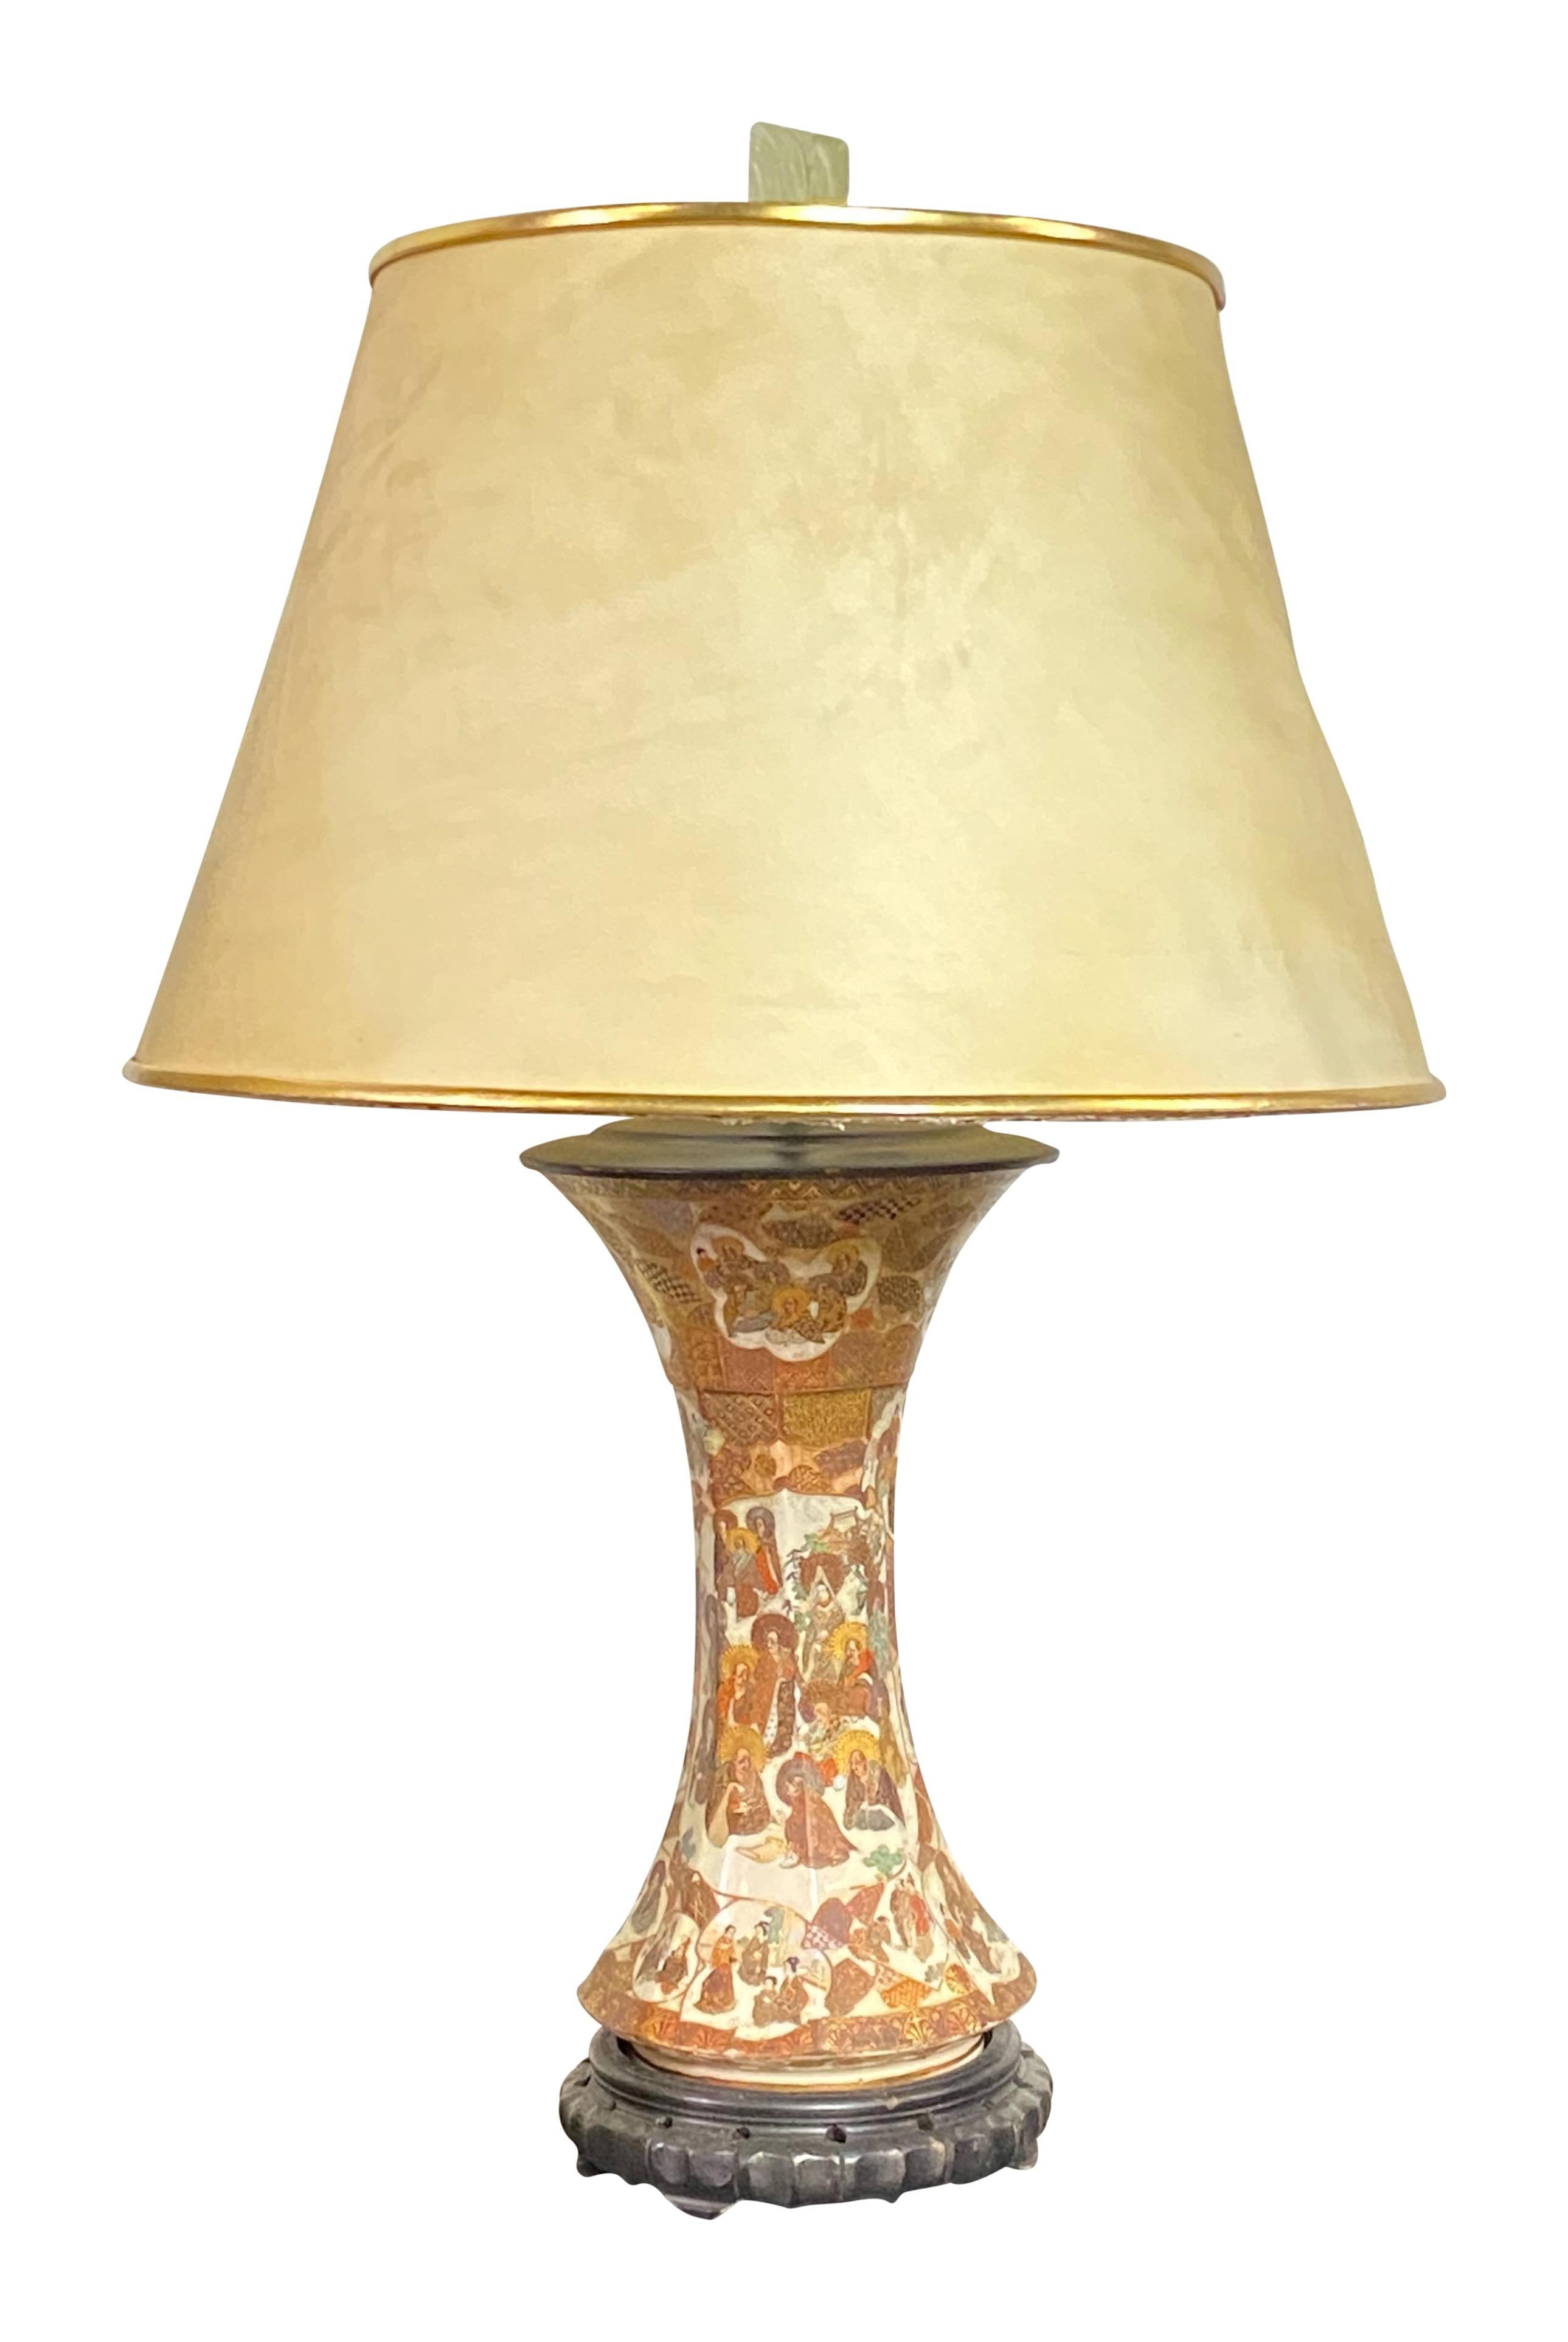 19th Century Meiji Period Japanese Satsuma Table Lamp In Good Condition For Sale In San Francisco, CA